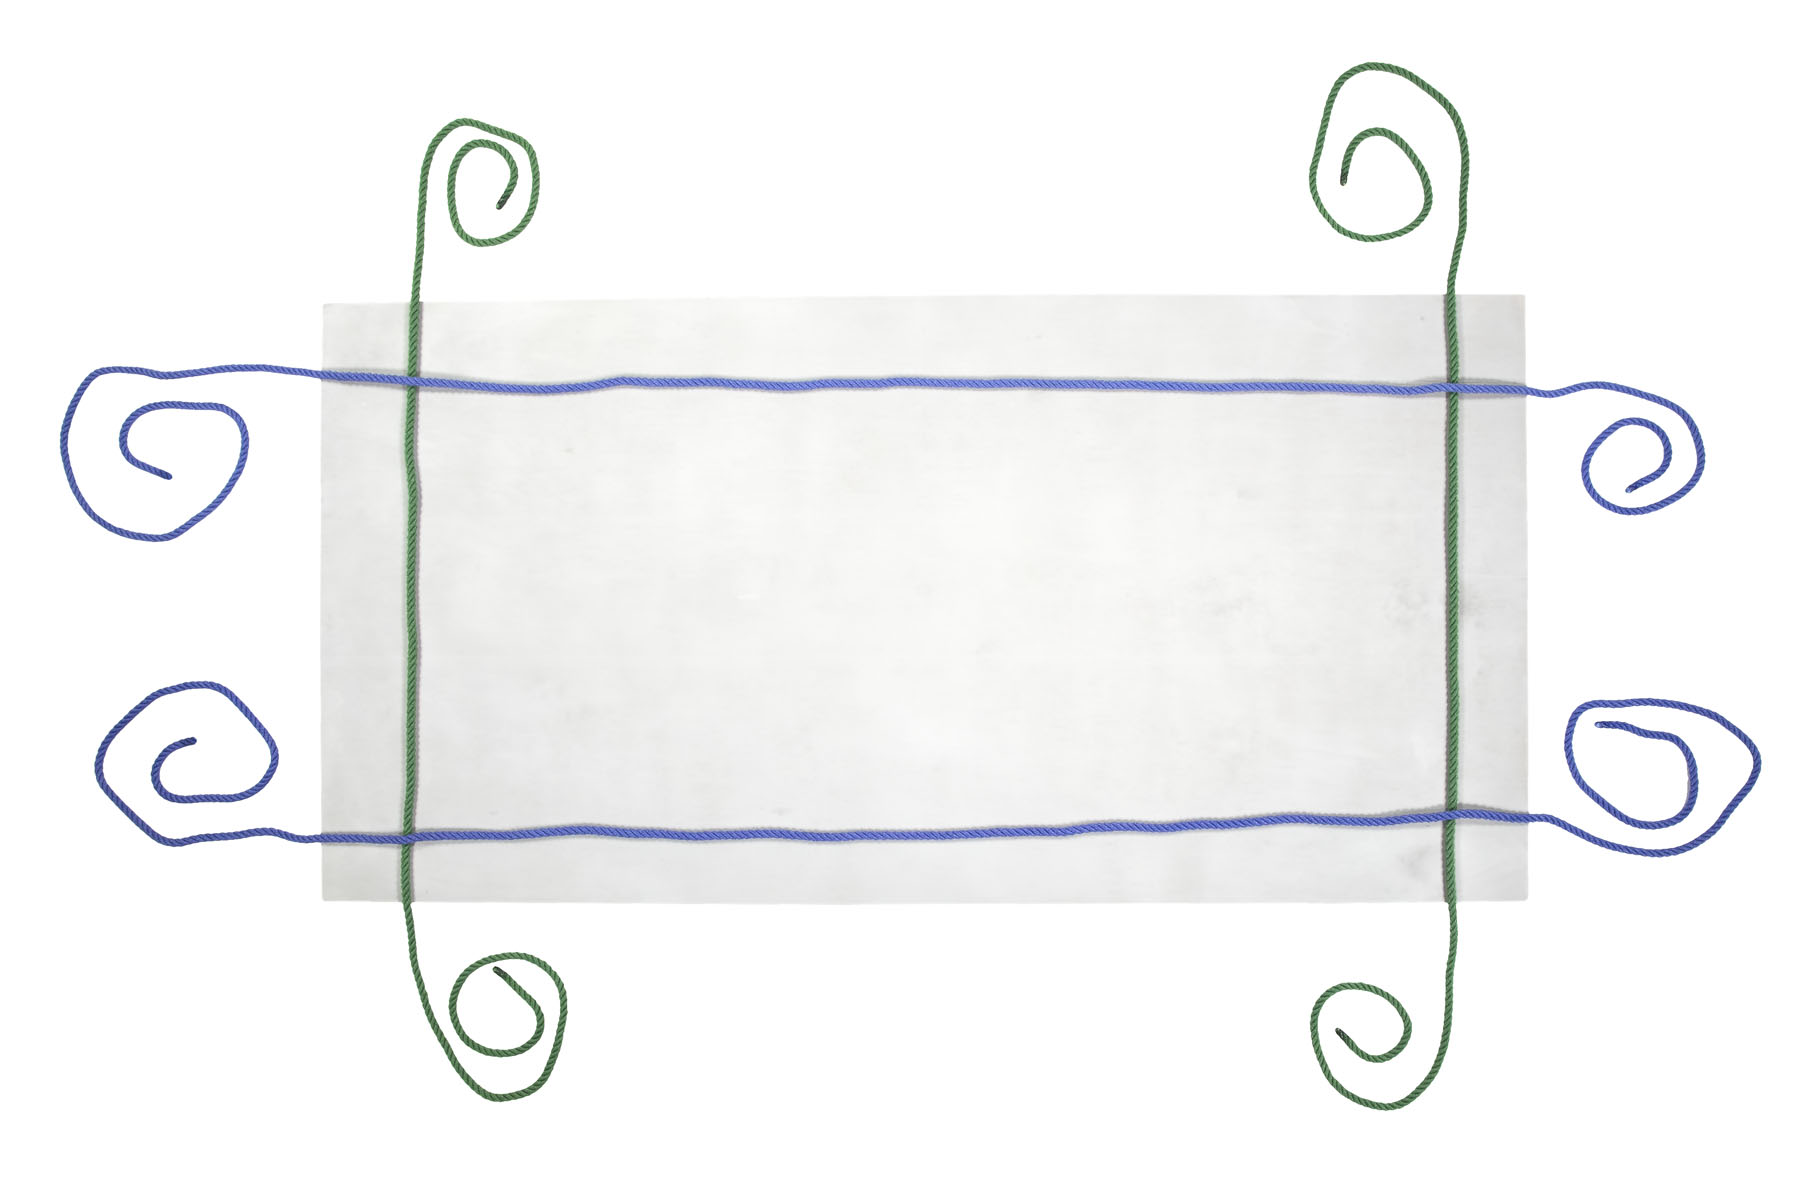 A plain gray board lying on the floor represents a mattress. It is about three feet from left to right and two feet from top to bottom. Two green ropes cross the board vertically, one three inches from the left edge and one three inches from the right edge. Two blue ropes cross the board horizontally, crossing over the green ropes. One is three inches from the top edge and the other is three inches from the bottom edge.